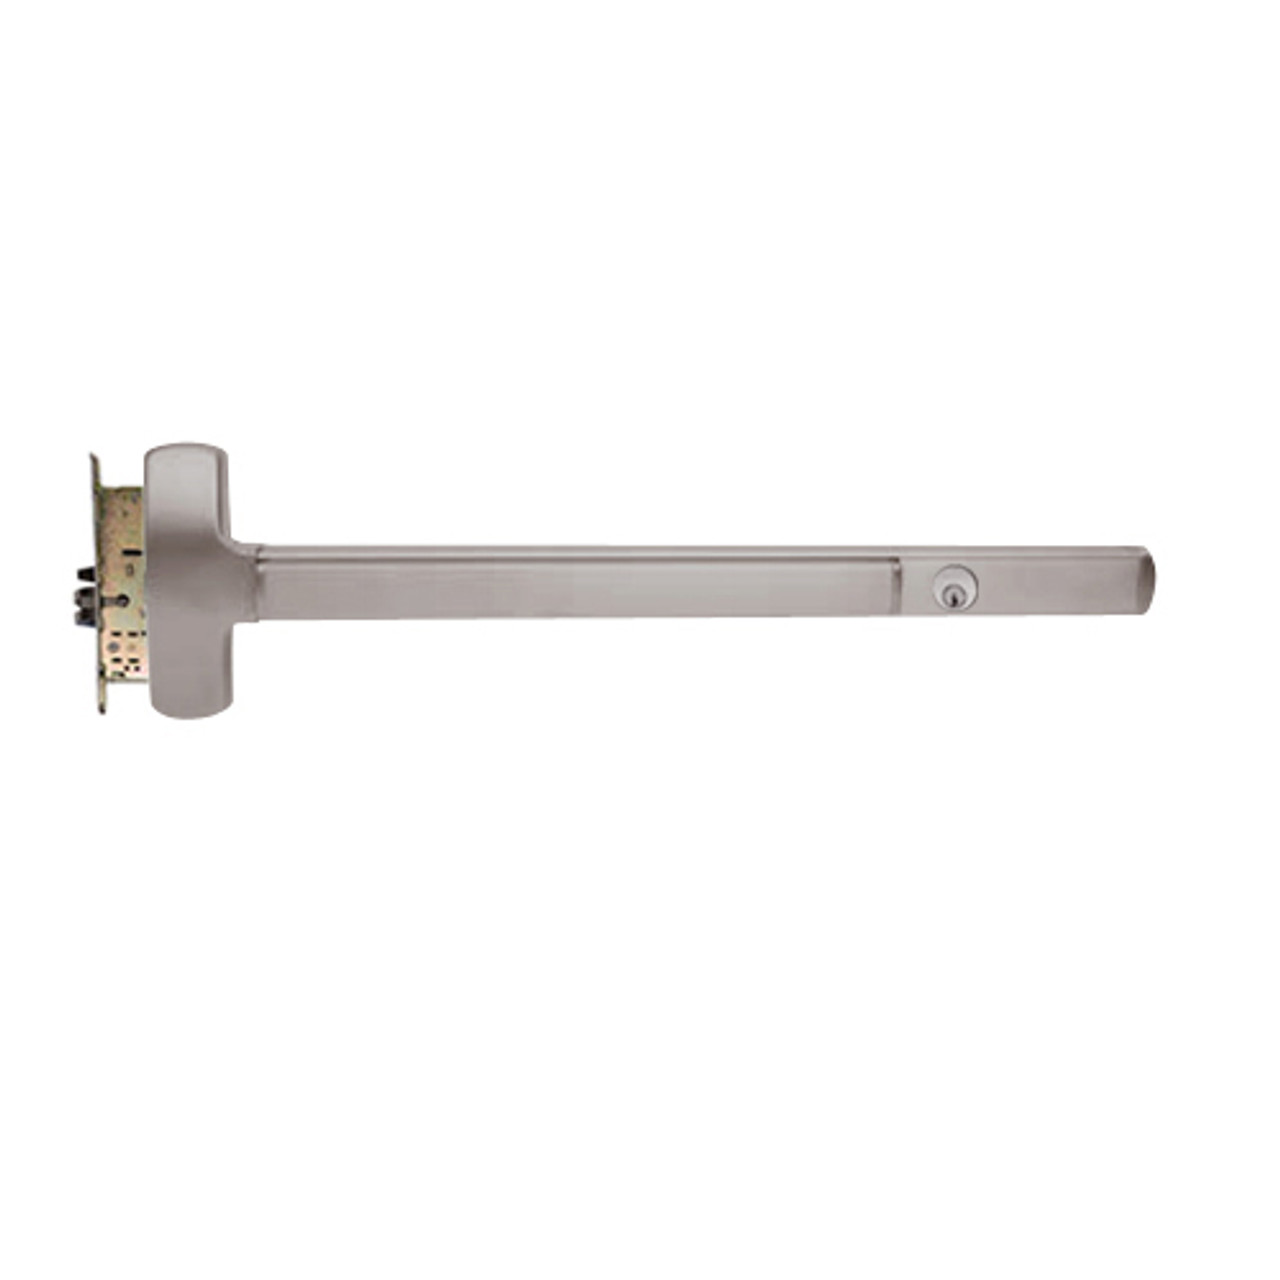 CD25-M-NL-OP-US28-3-RHR Falcon Exit Device in Anodized Aluminum